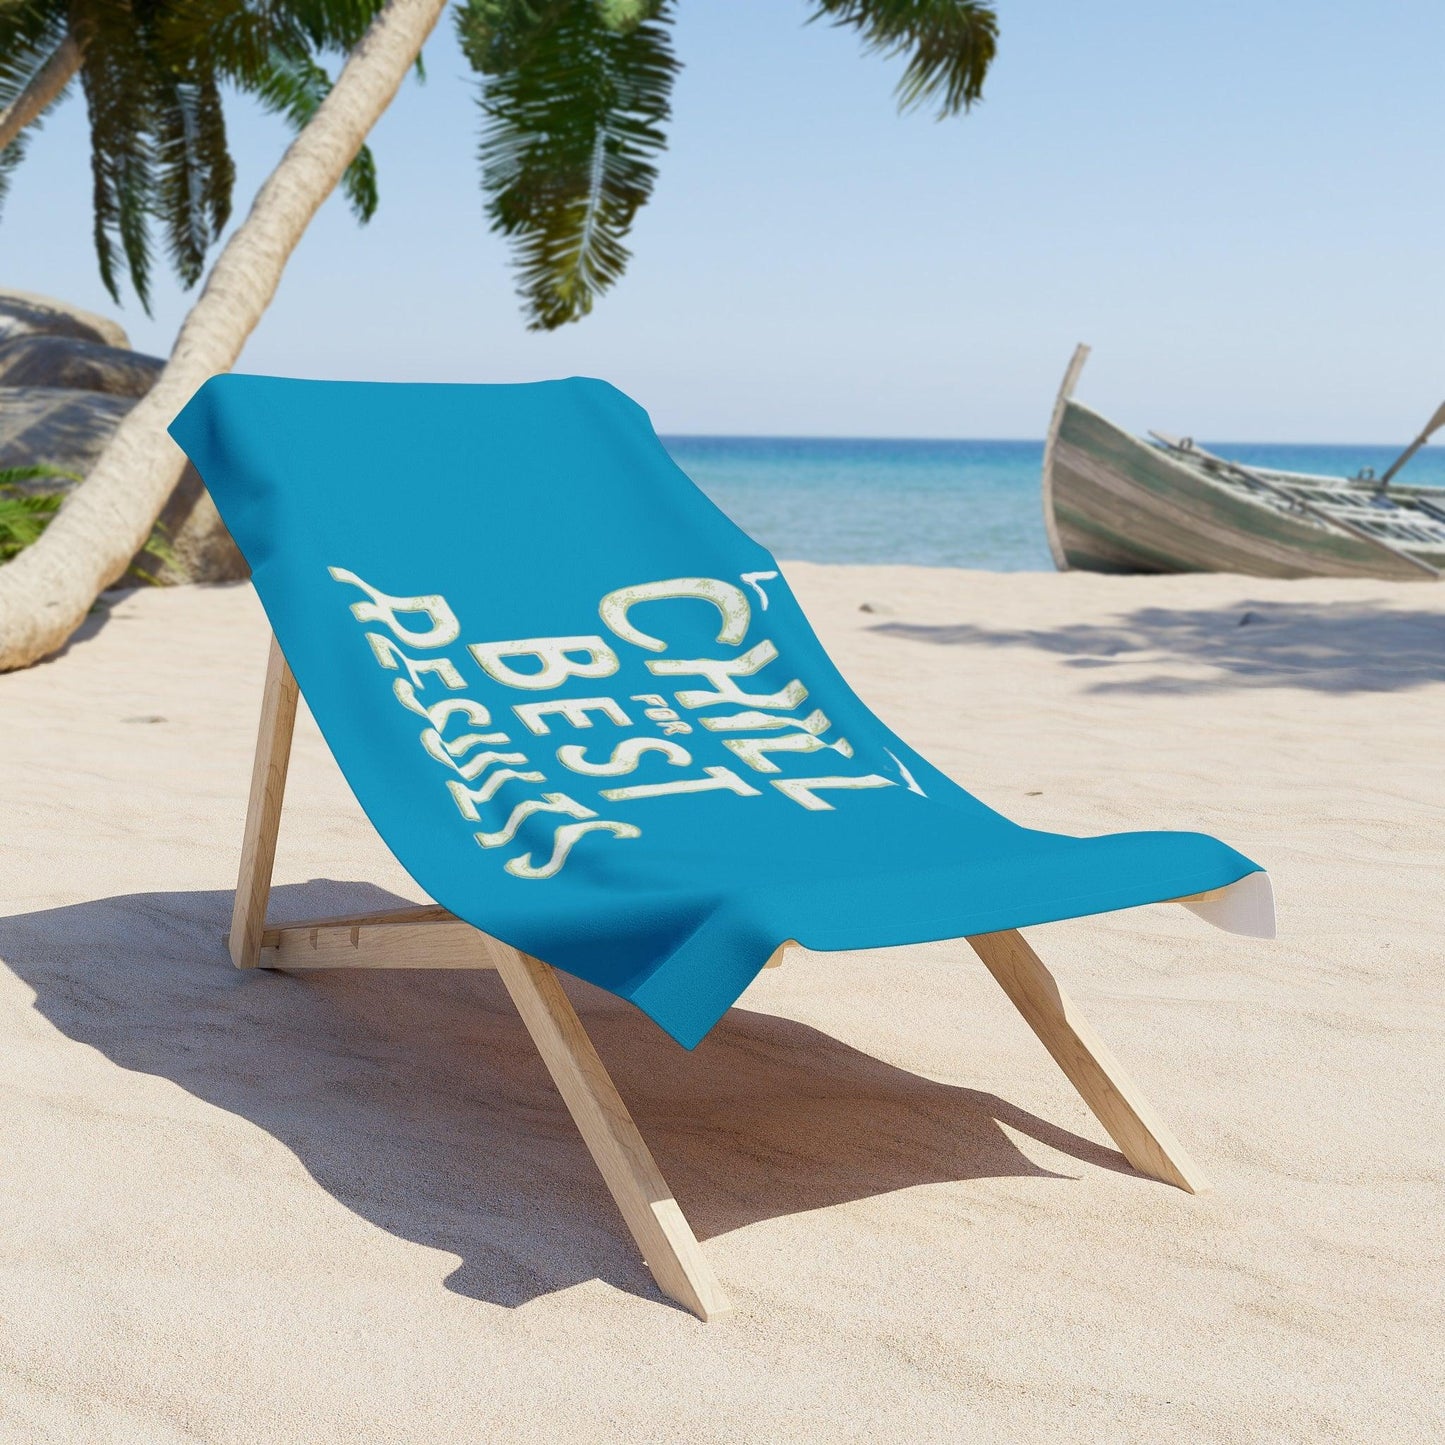 Chill for Best Results Beach Towel - Coastal Collections